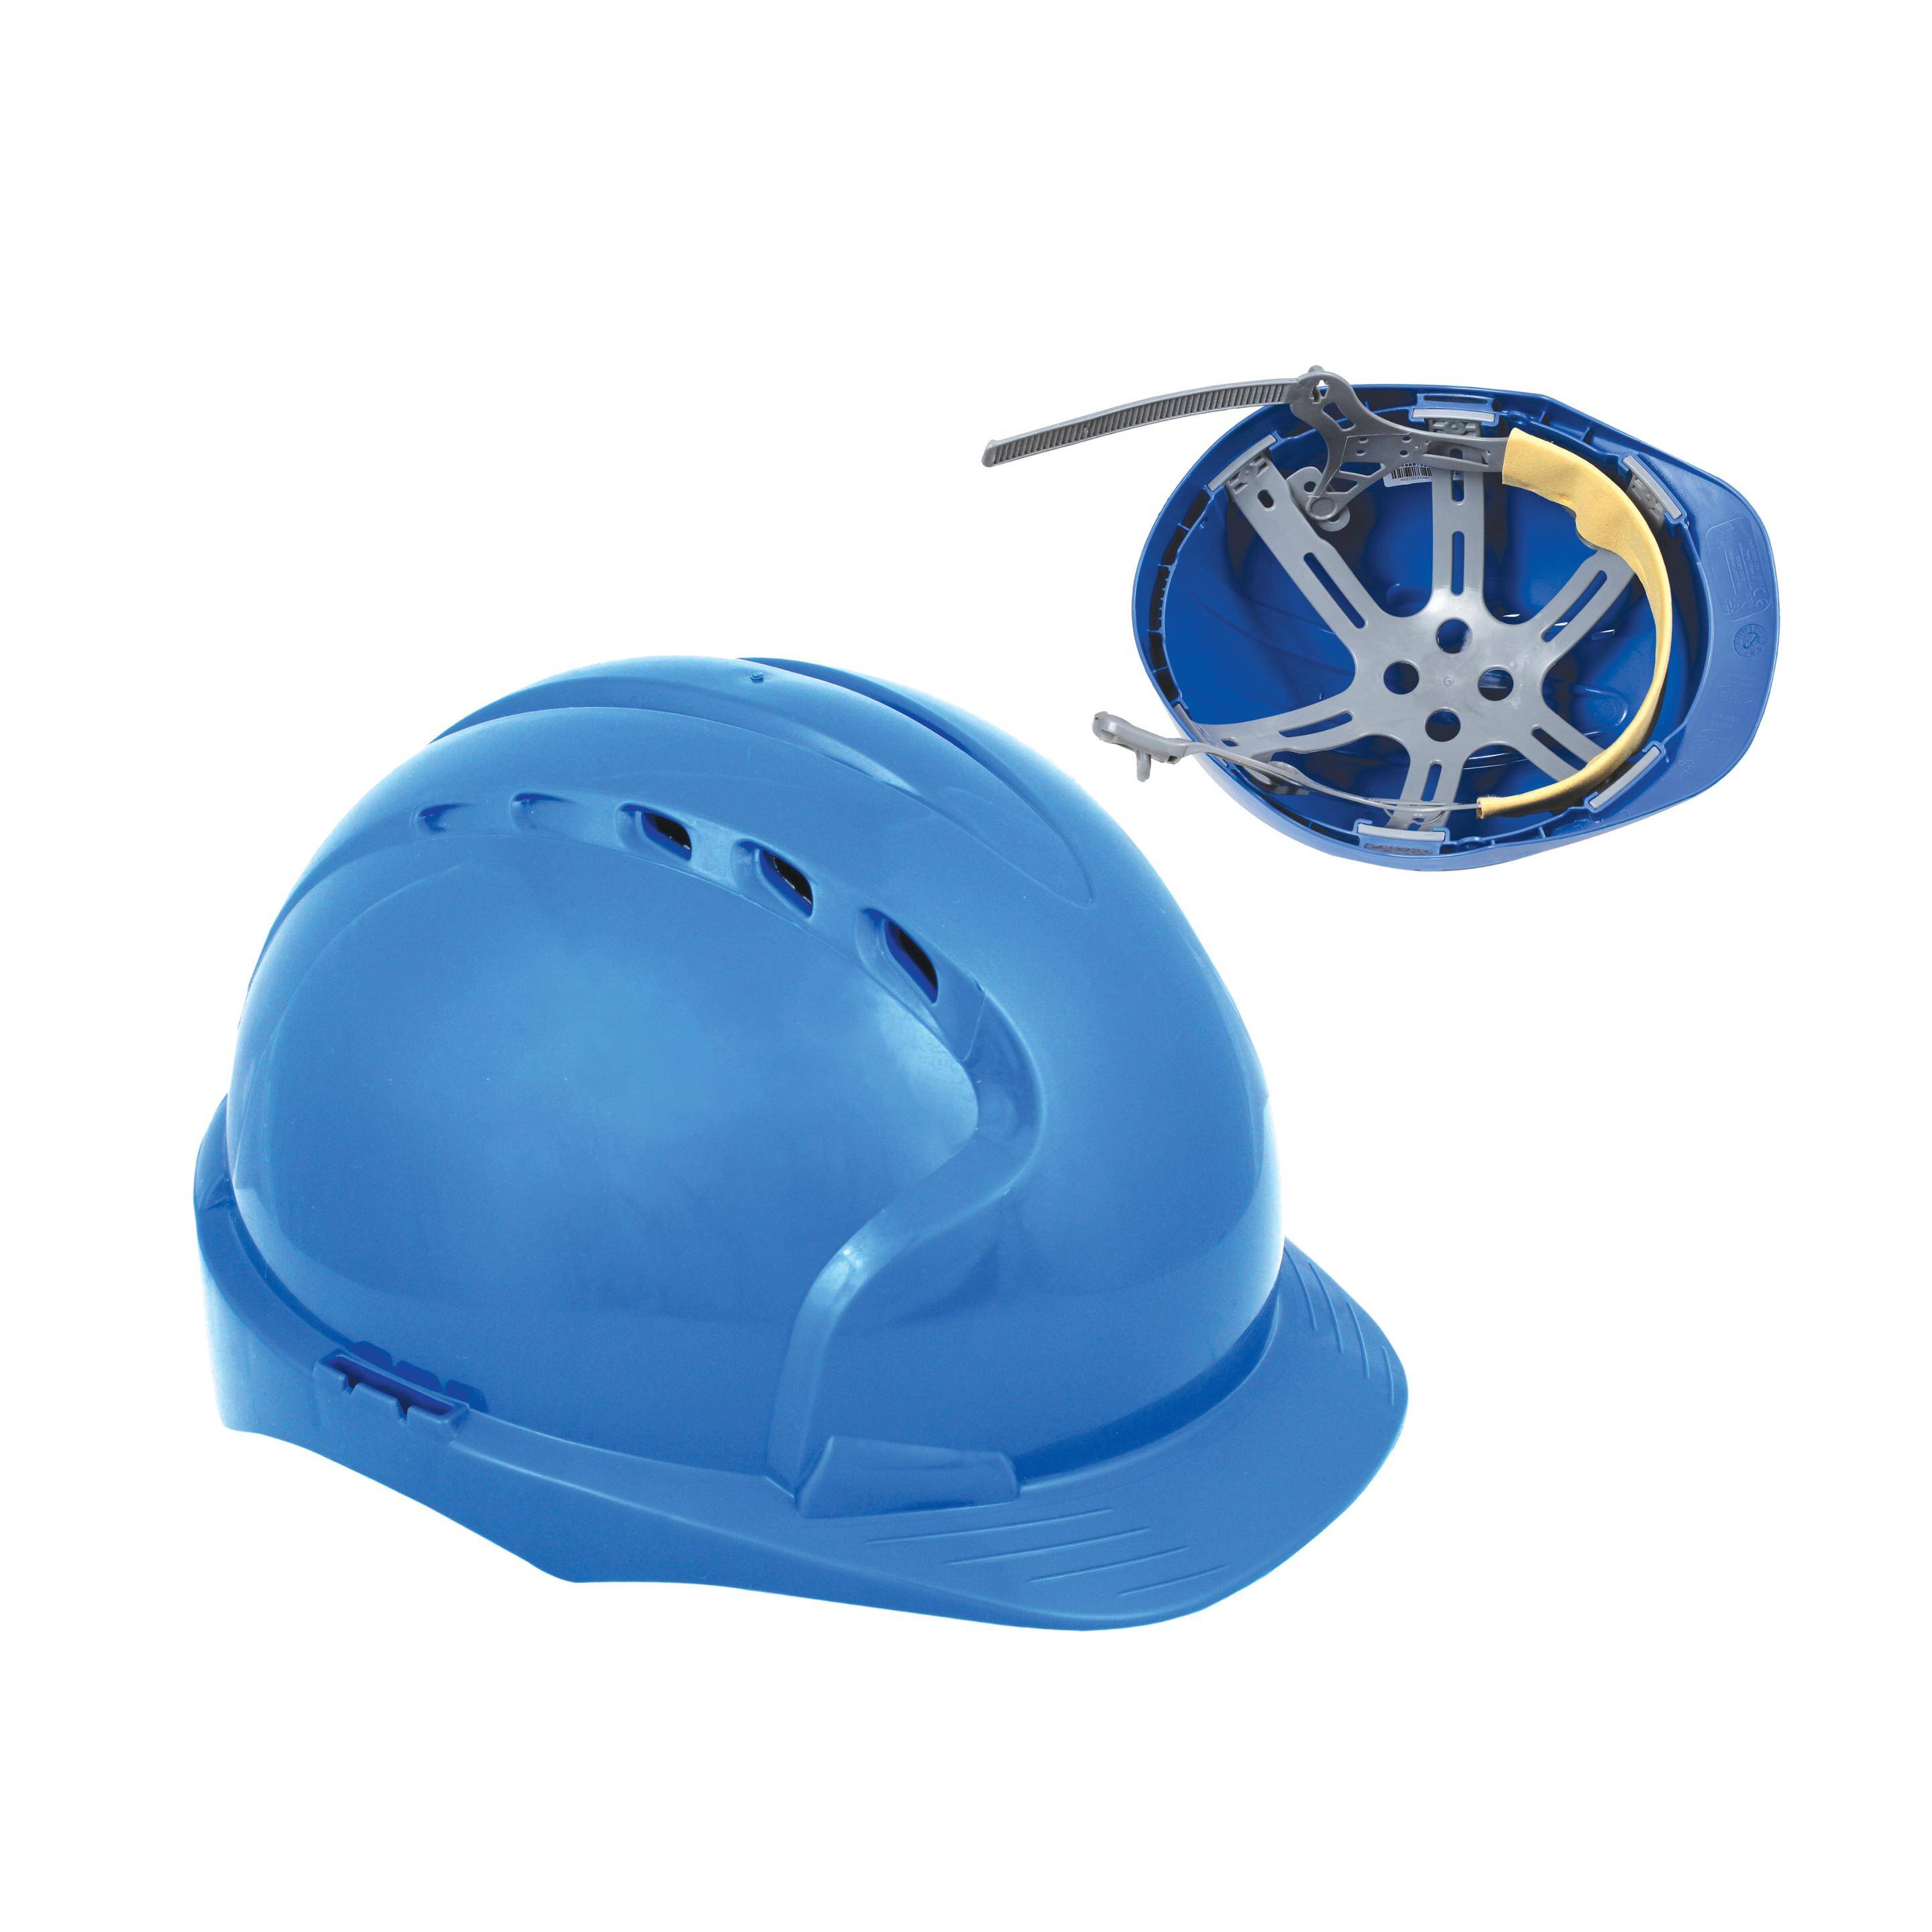 Workwear and safety articles